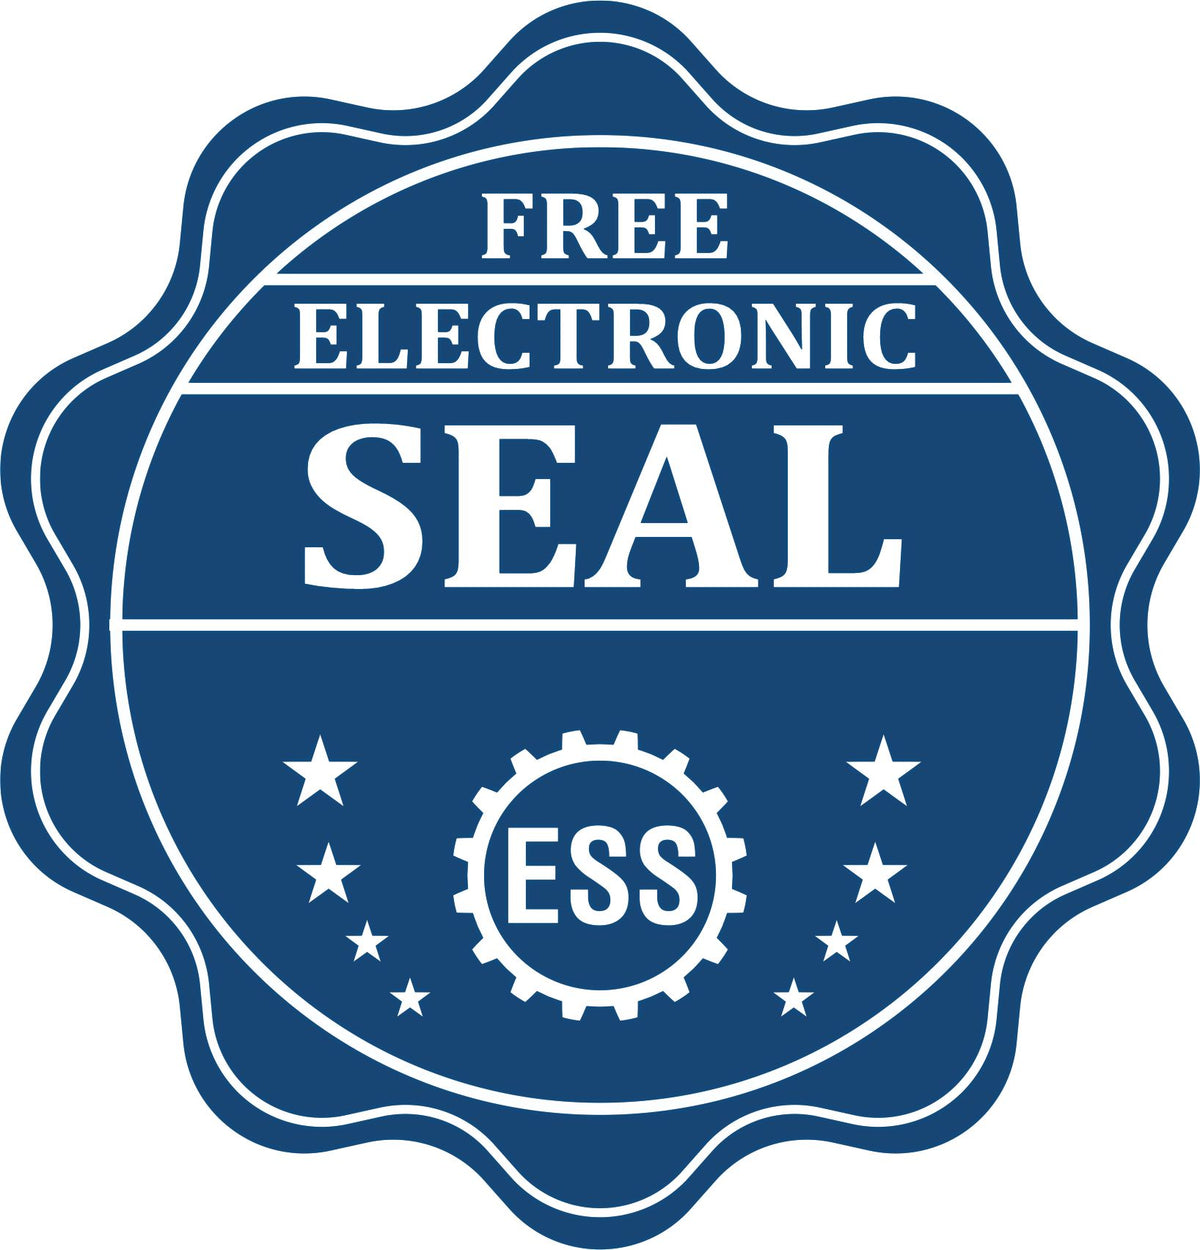 A badge showing a free electronic seal for the Georgia Geologist Desk Seal with stars and the ESS gear on the emblem.